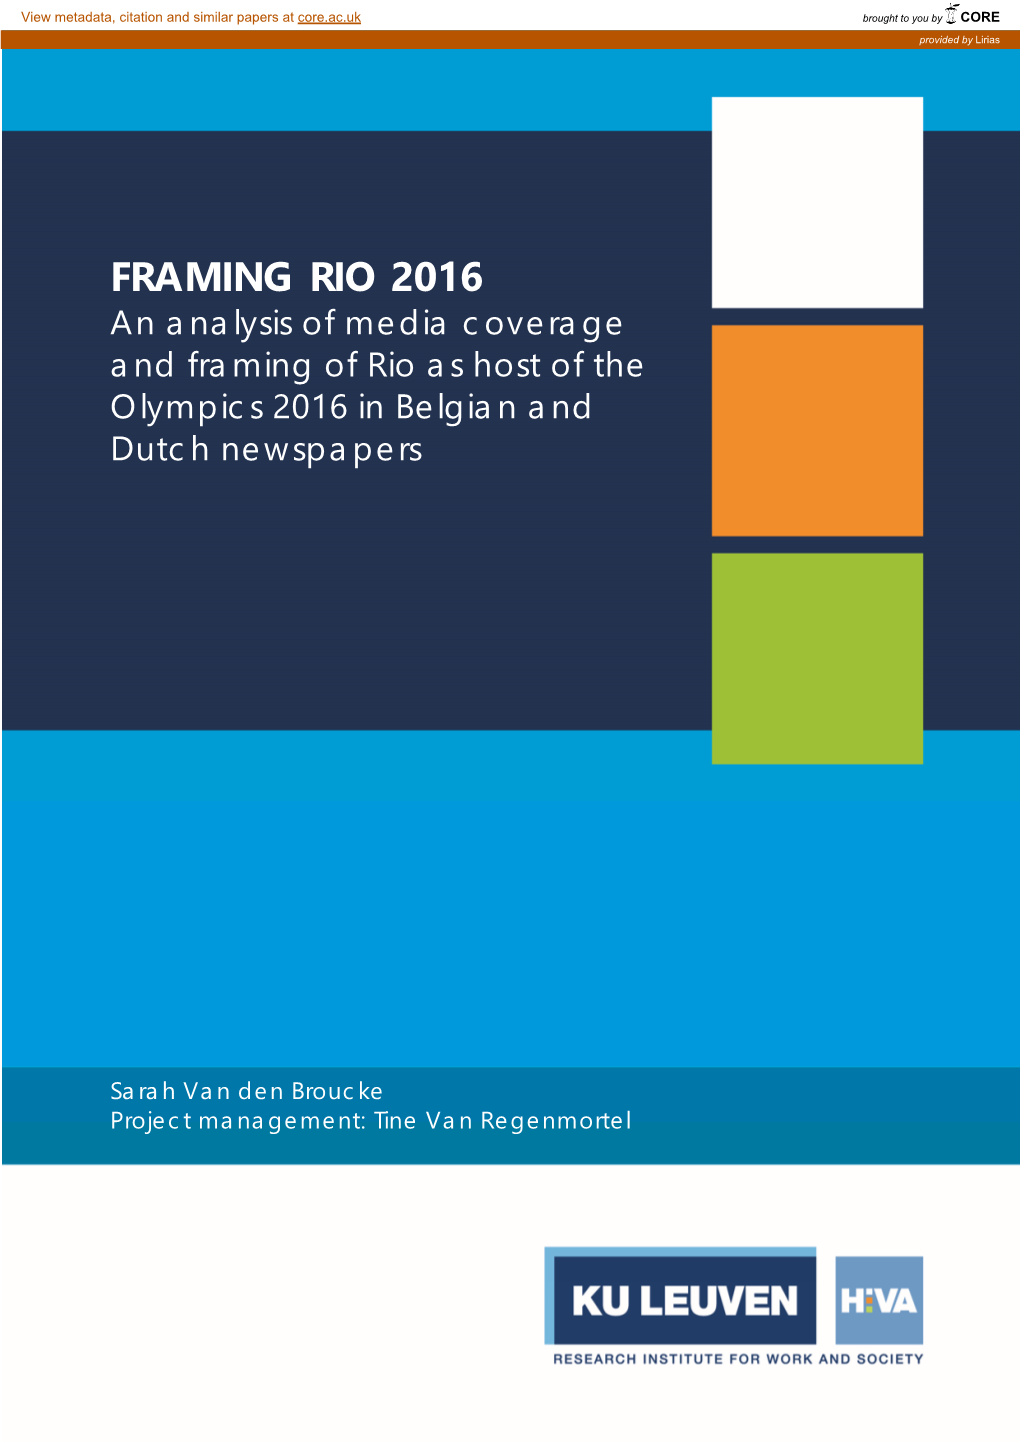 FRAMING RIO 2016 an Analysis of Media Coverage and Framing of Rio As Host of the Olympics 2016 in Belgian and Dutch Newspapers